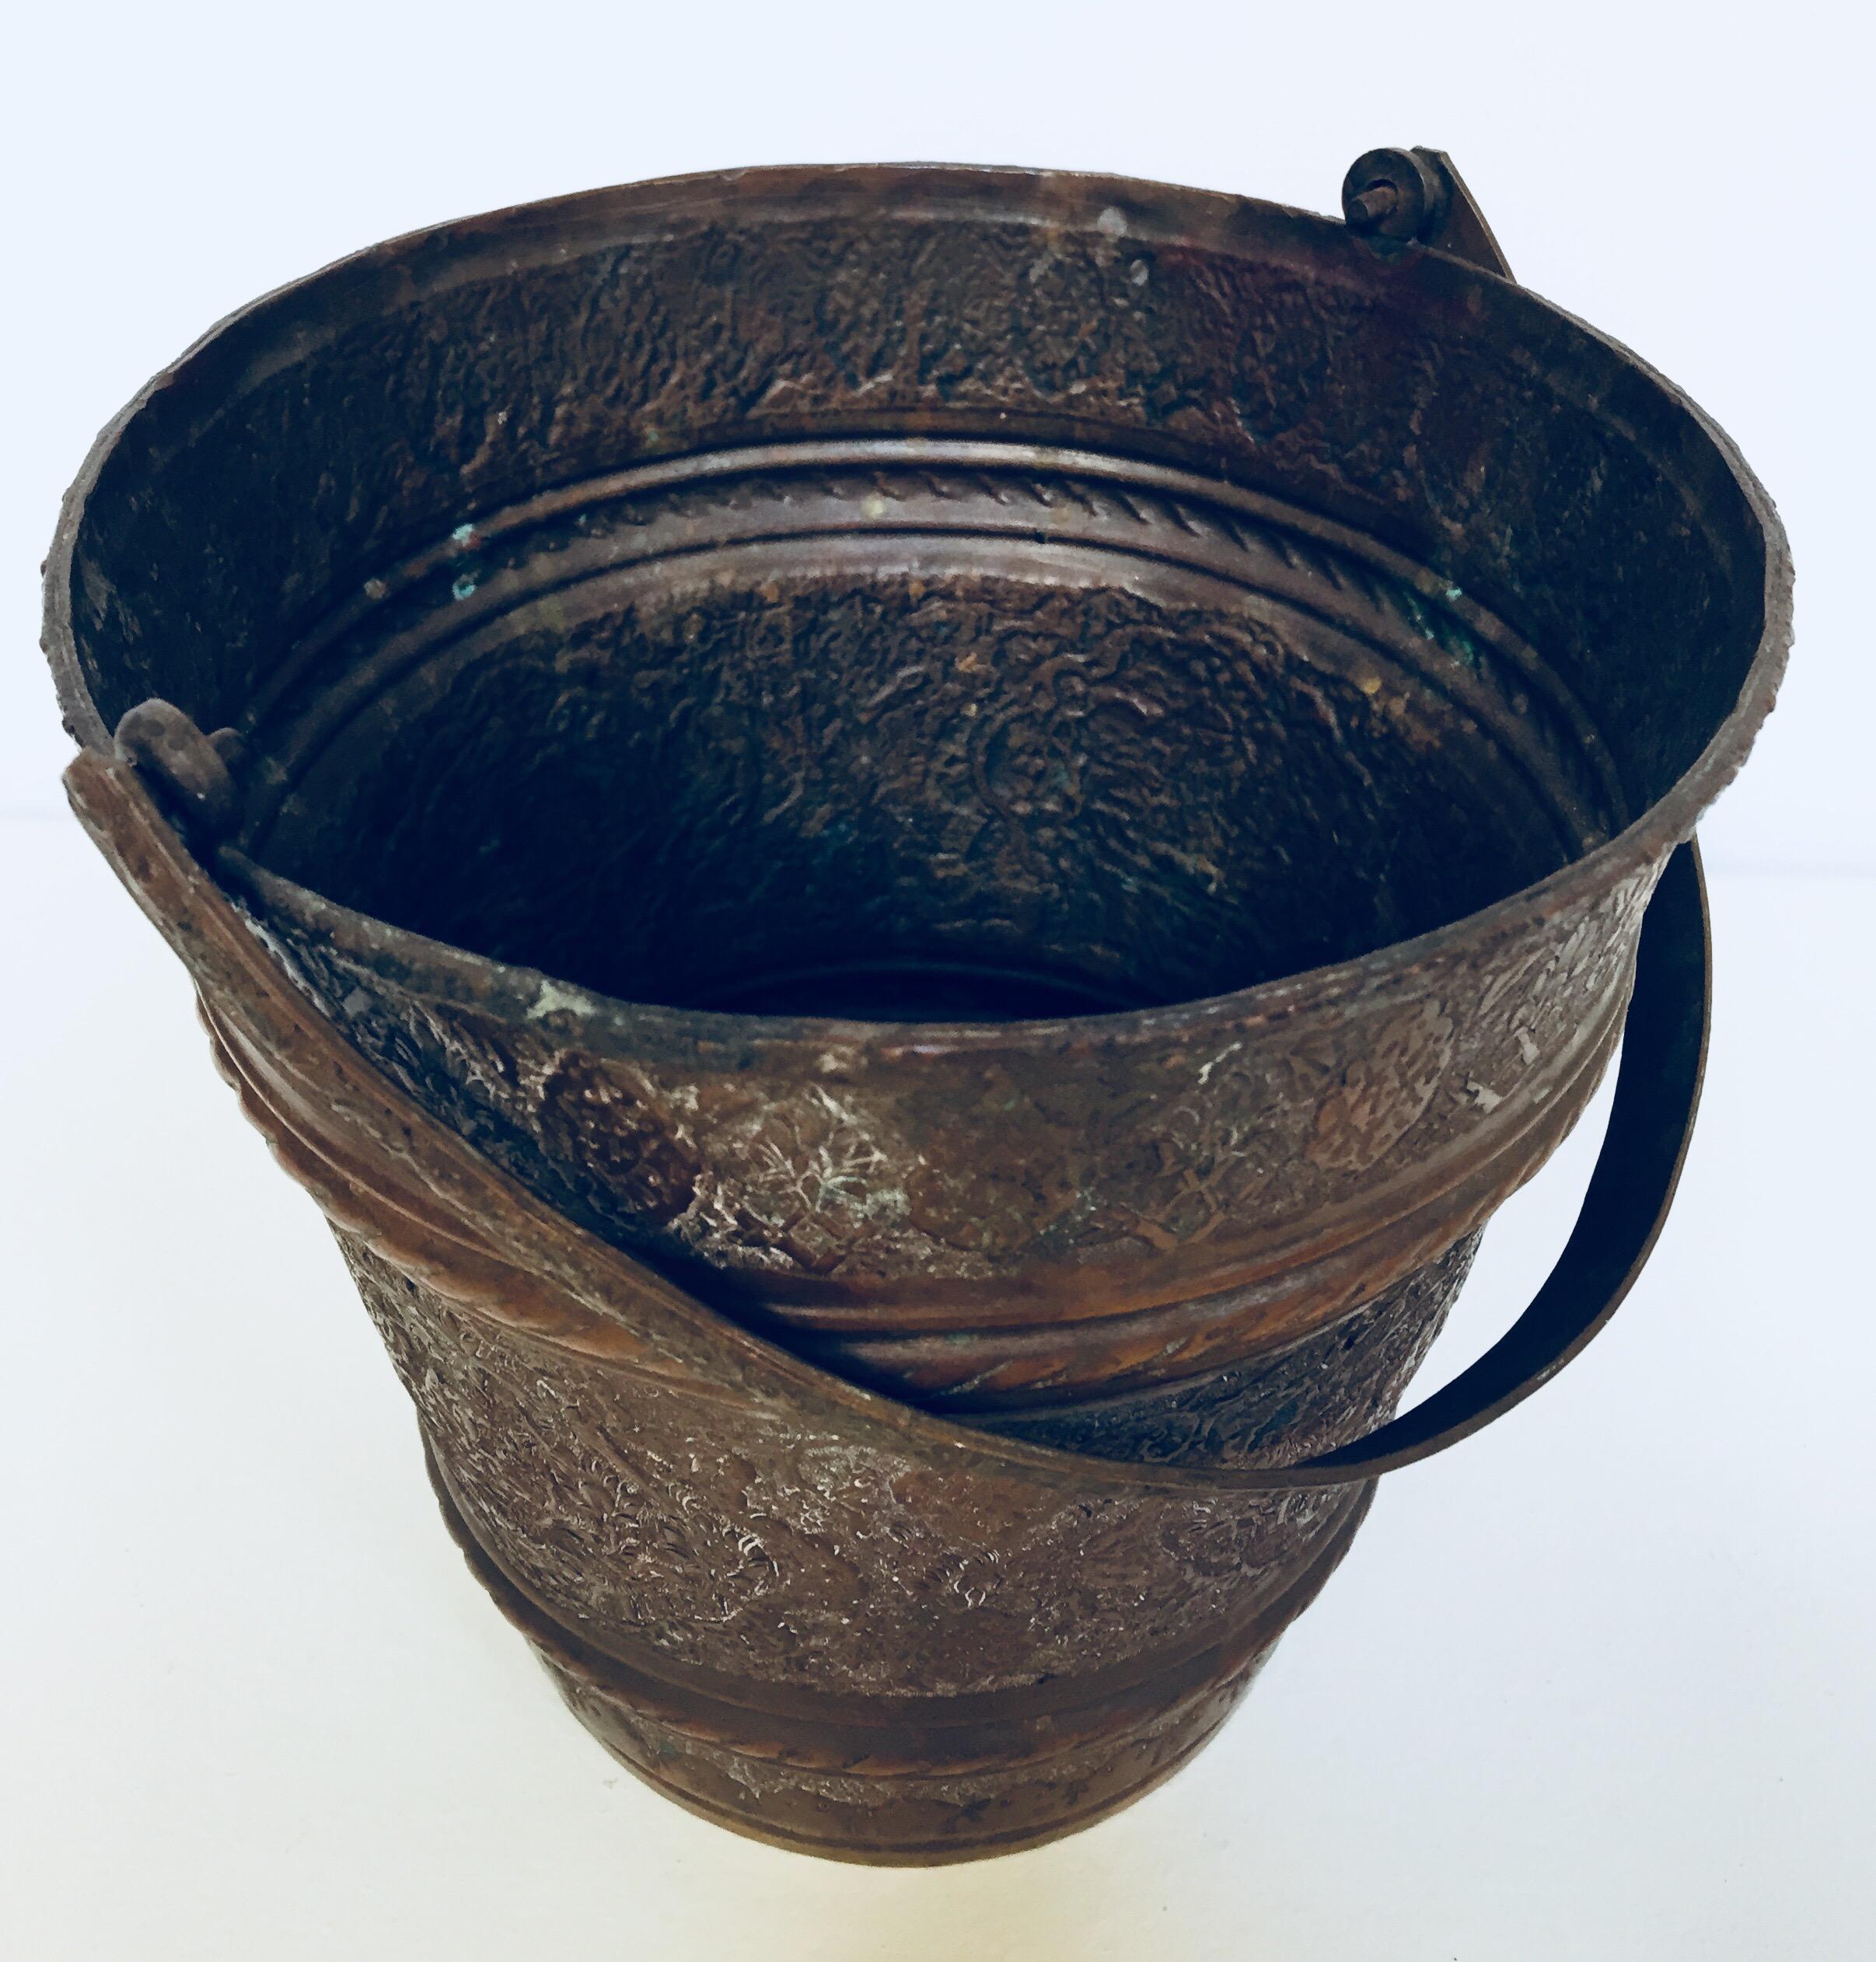 19th century Anglo Raj Moorish Mughal bronzed handcrafted metal copper pot vessel.
Originally used to carry water, this hand-hammered metal vessel from India has authentic texture, wonderful patina, and great form and character.
Great patina on